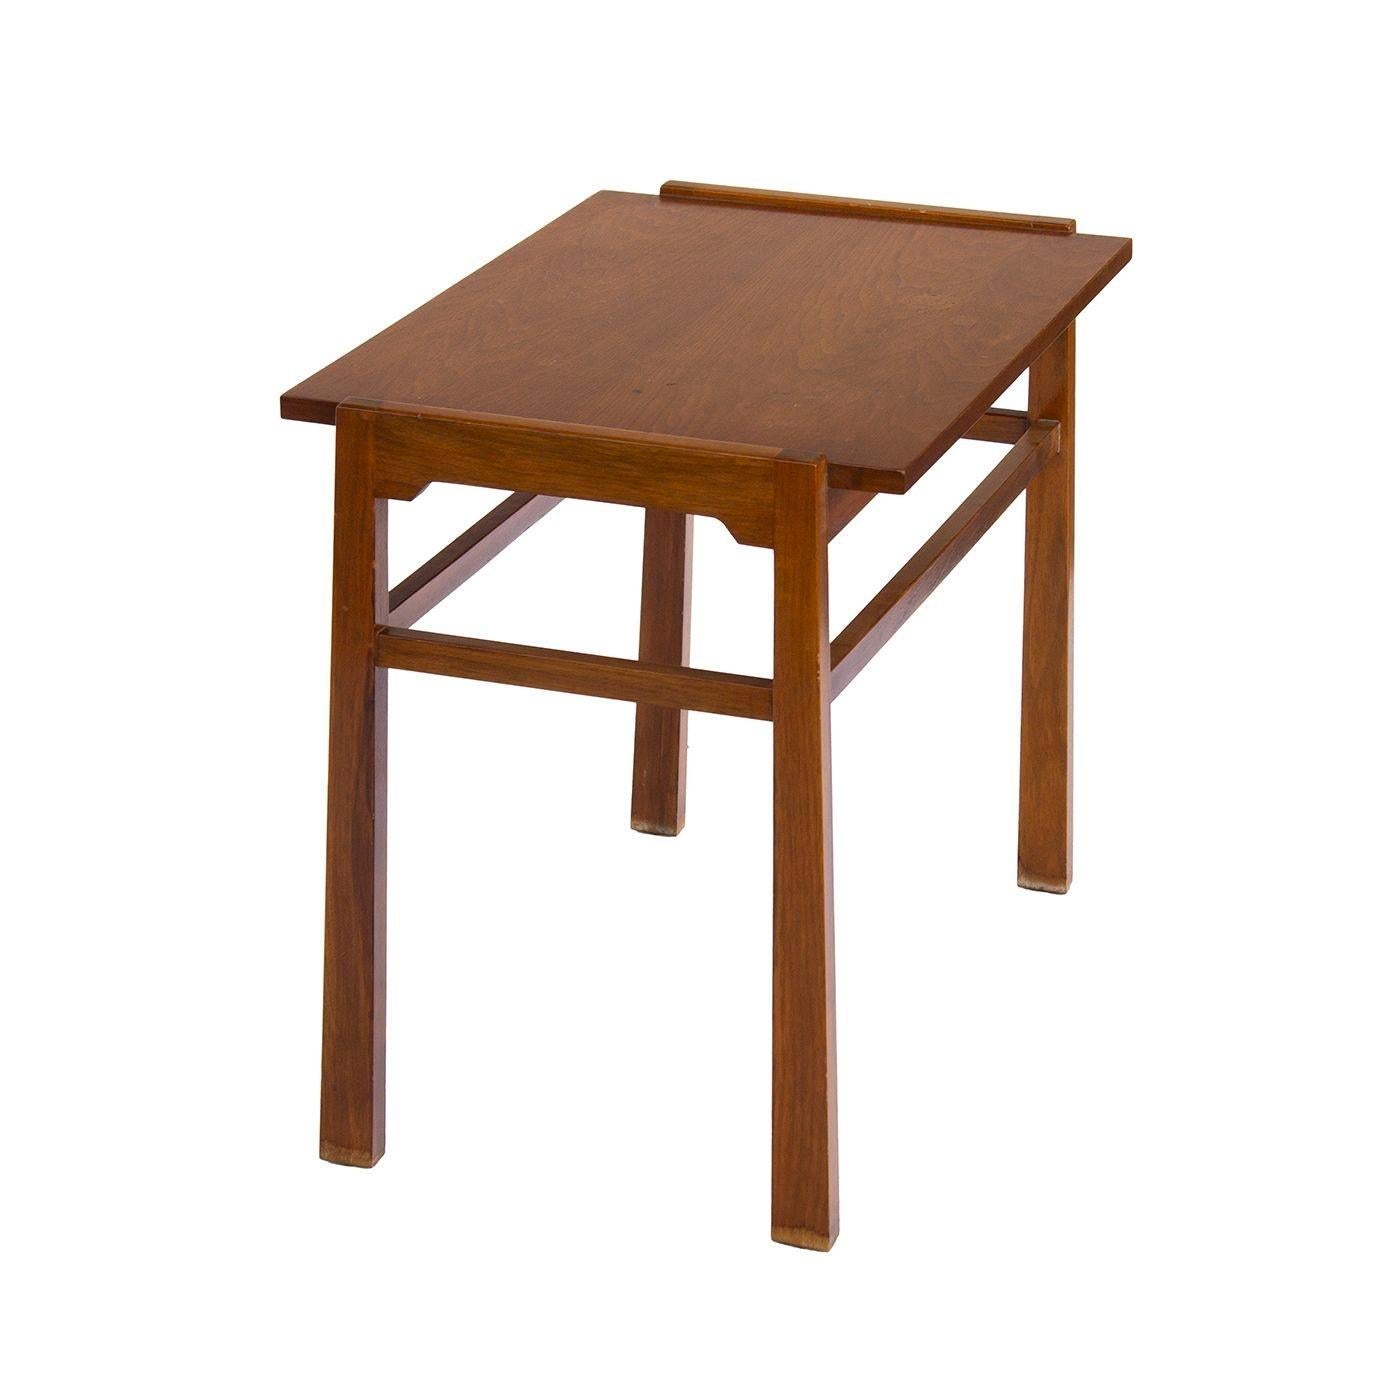 USA, 1960s
Midcentury Side Table in Walnut, attributed to Dunbar- no labels. Purchased with a similar signed coffee table. Interesting detail to this piece and a more unusual shape. Legs vary in width and tray side design.
CONDITION NOTES: In good